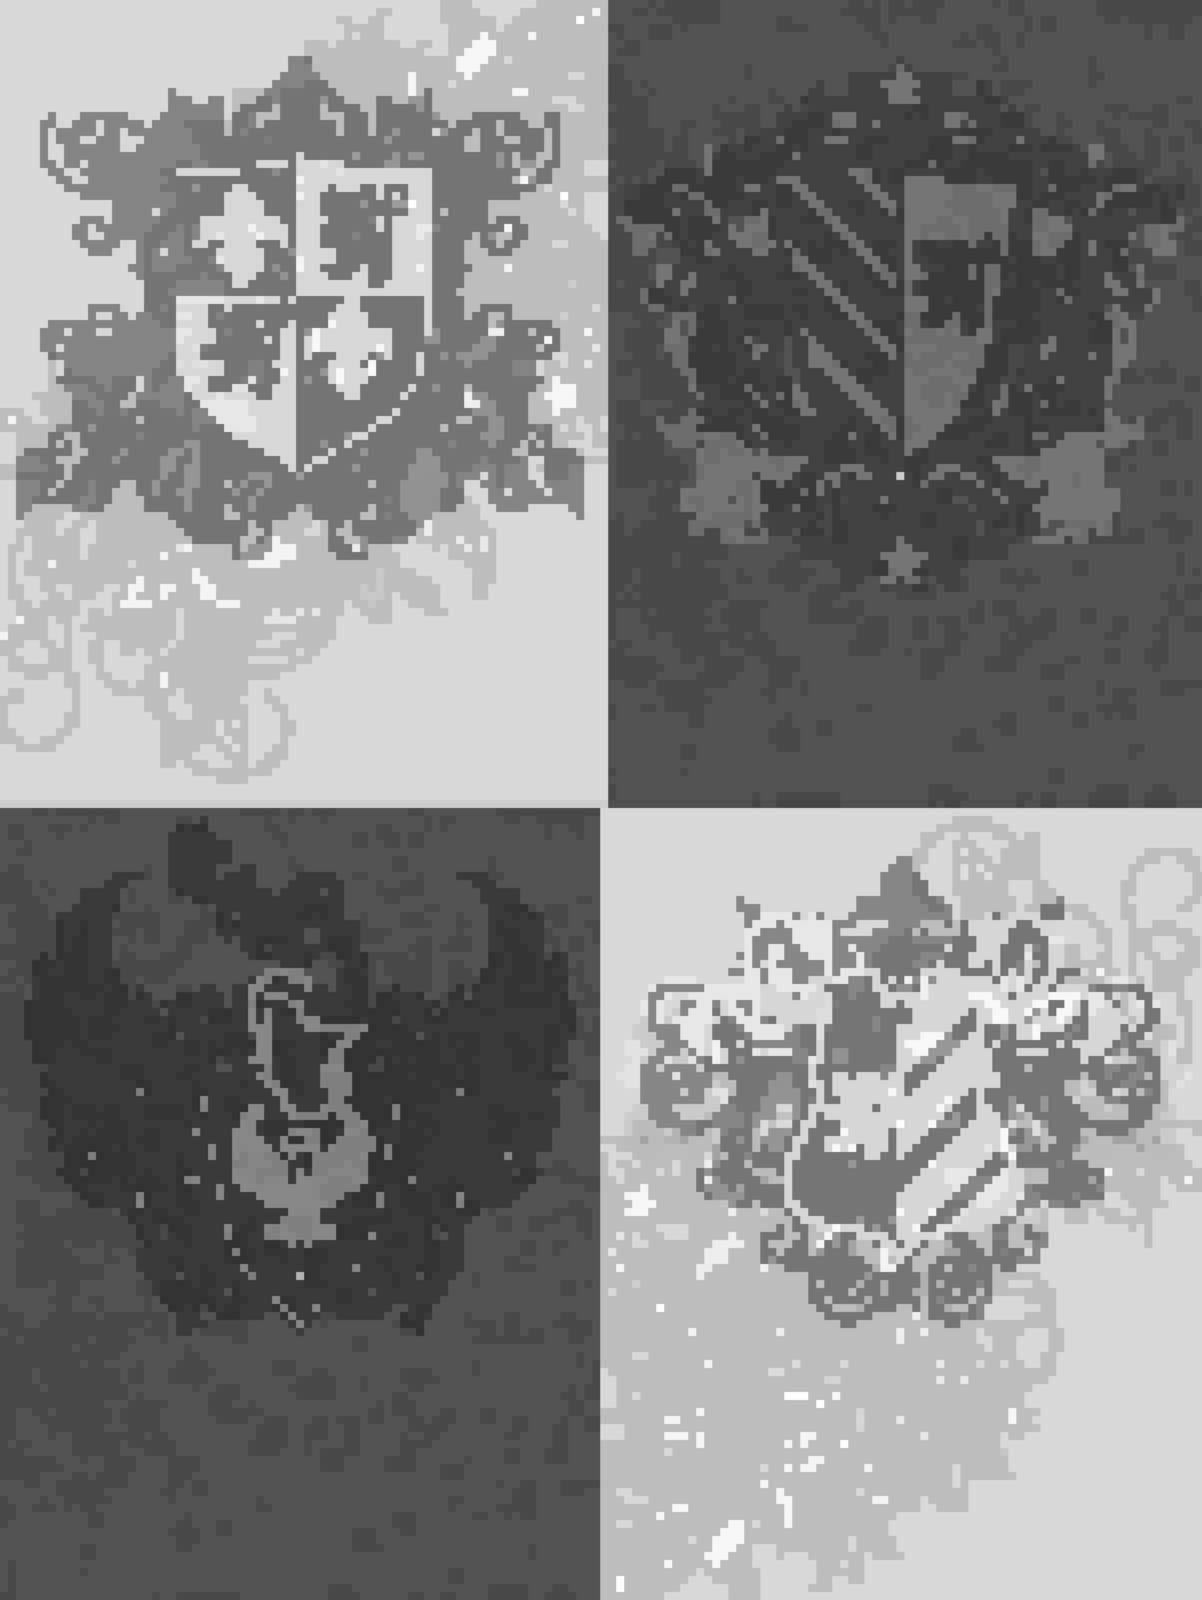 set of four heraldic shields against the gray background of different tones